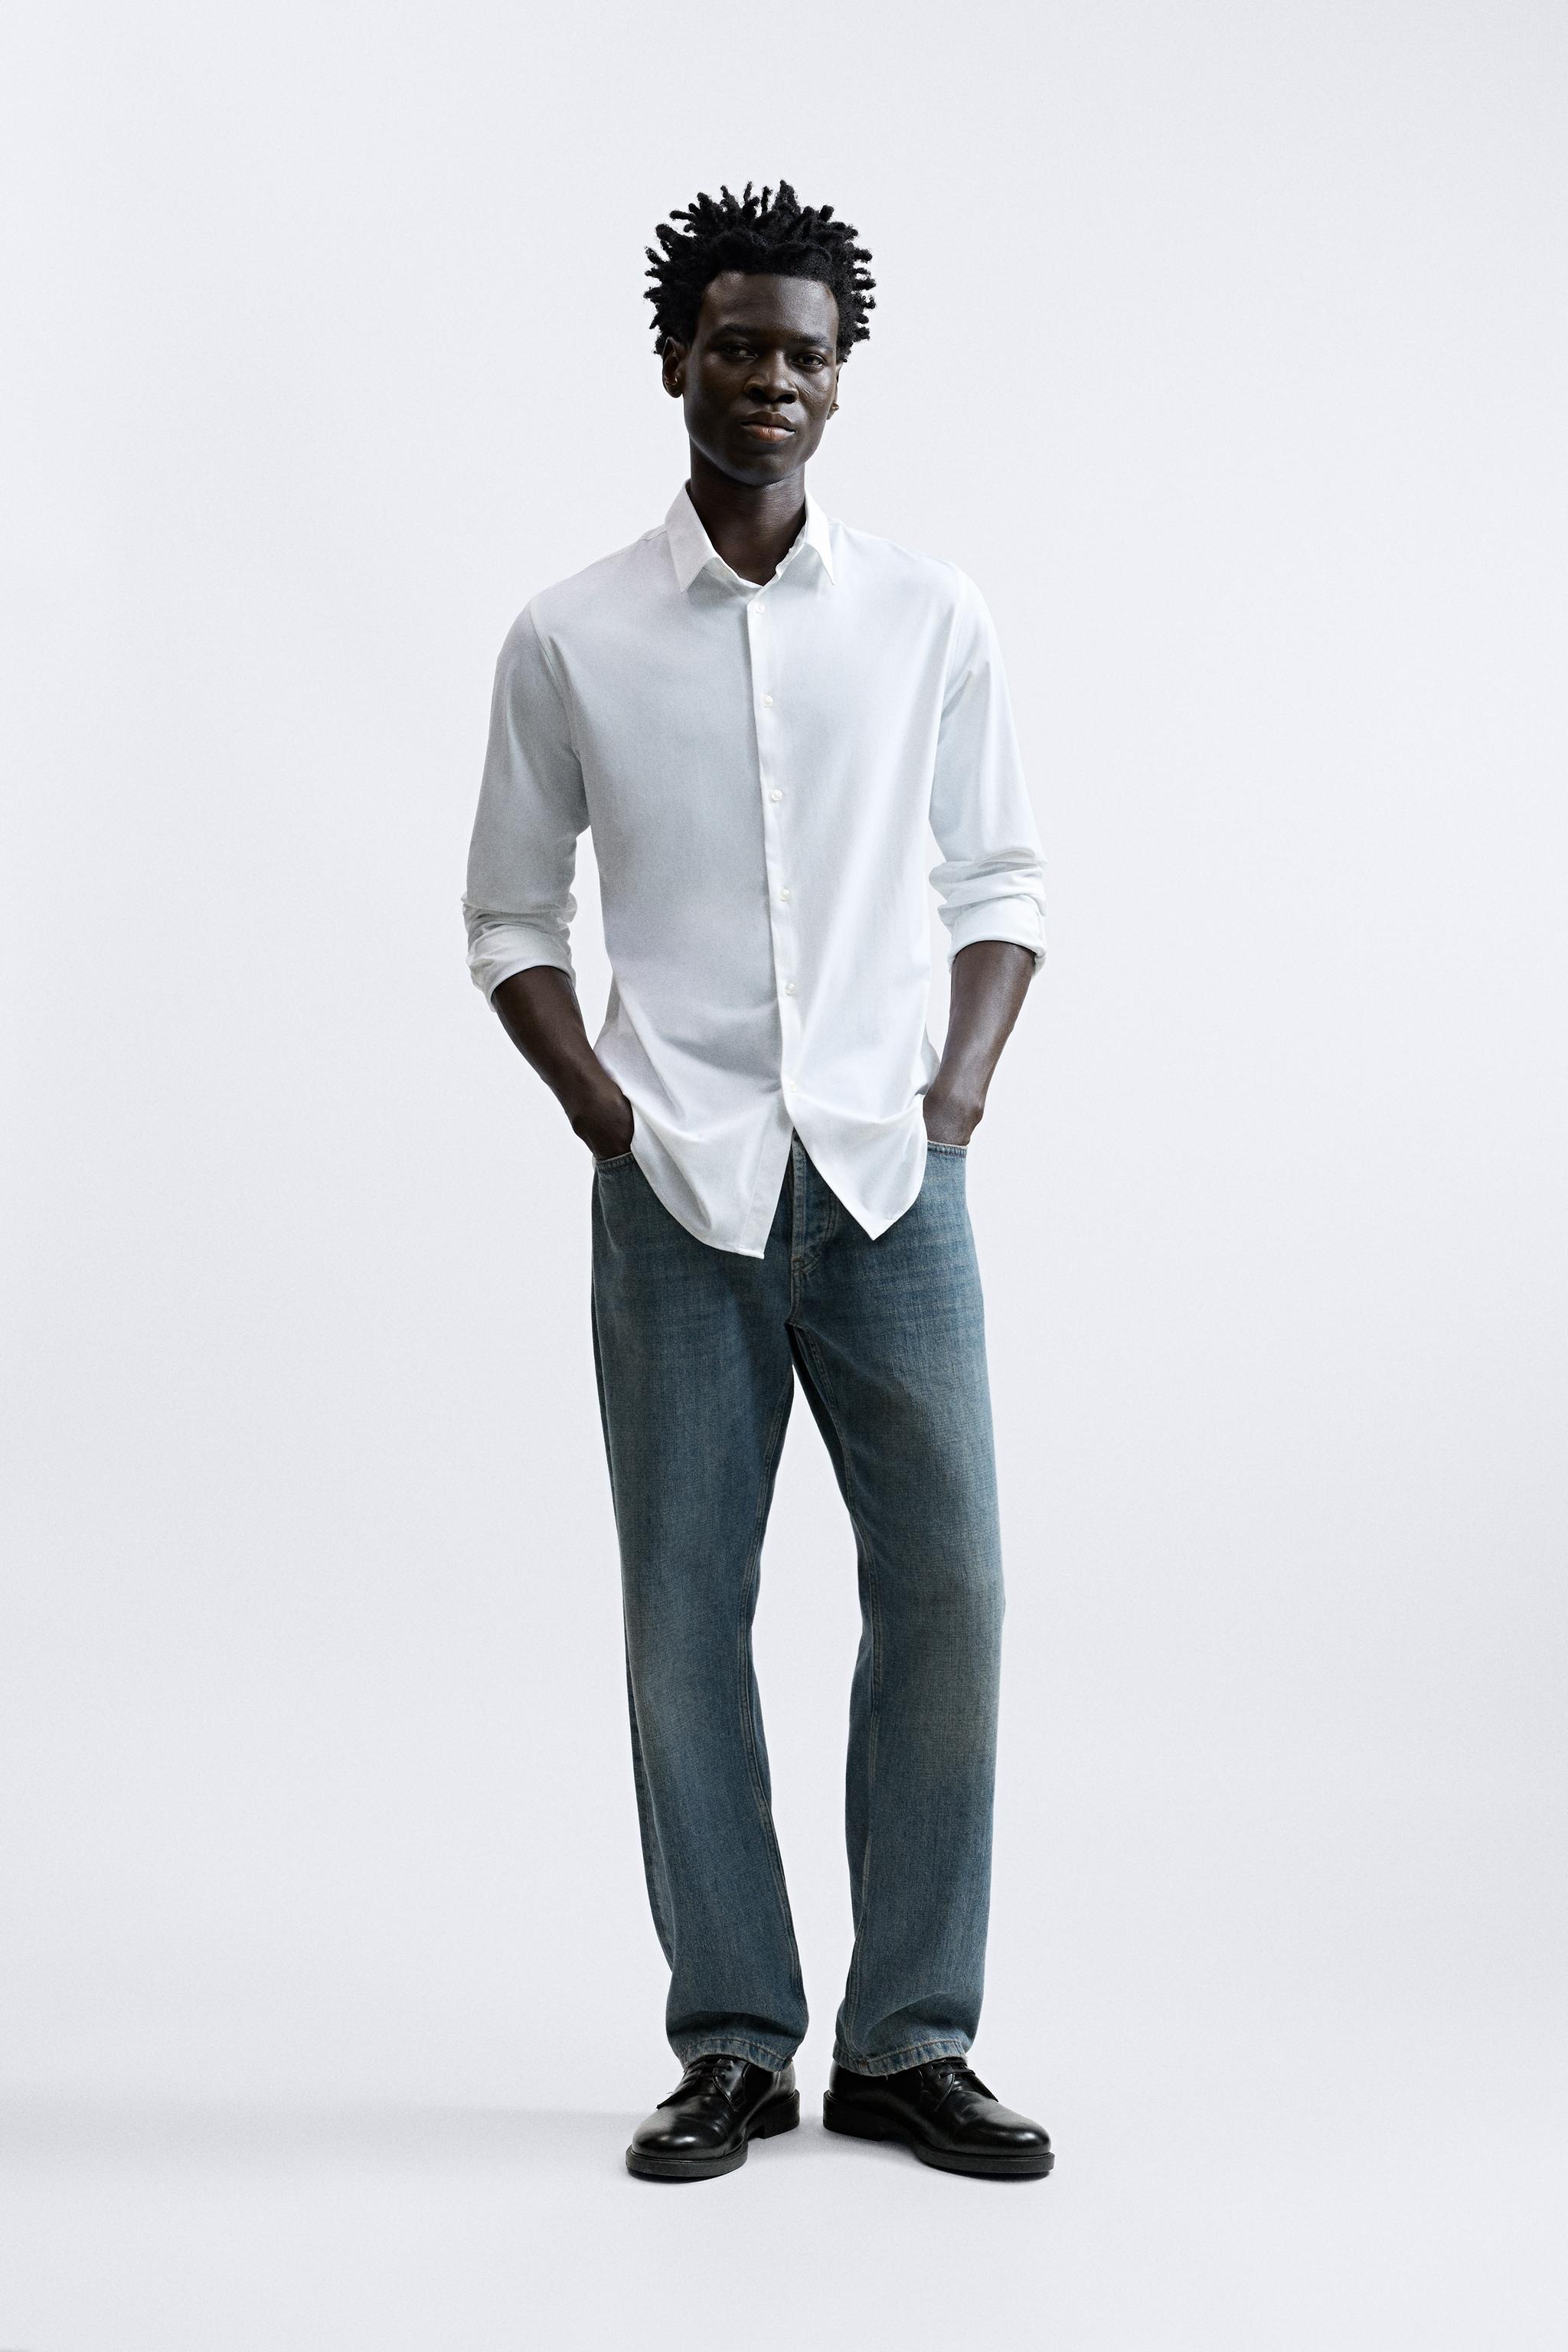 TEXTURED STRETCH PANTS - Oyster-white